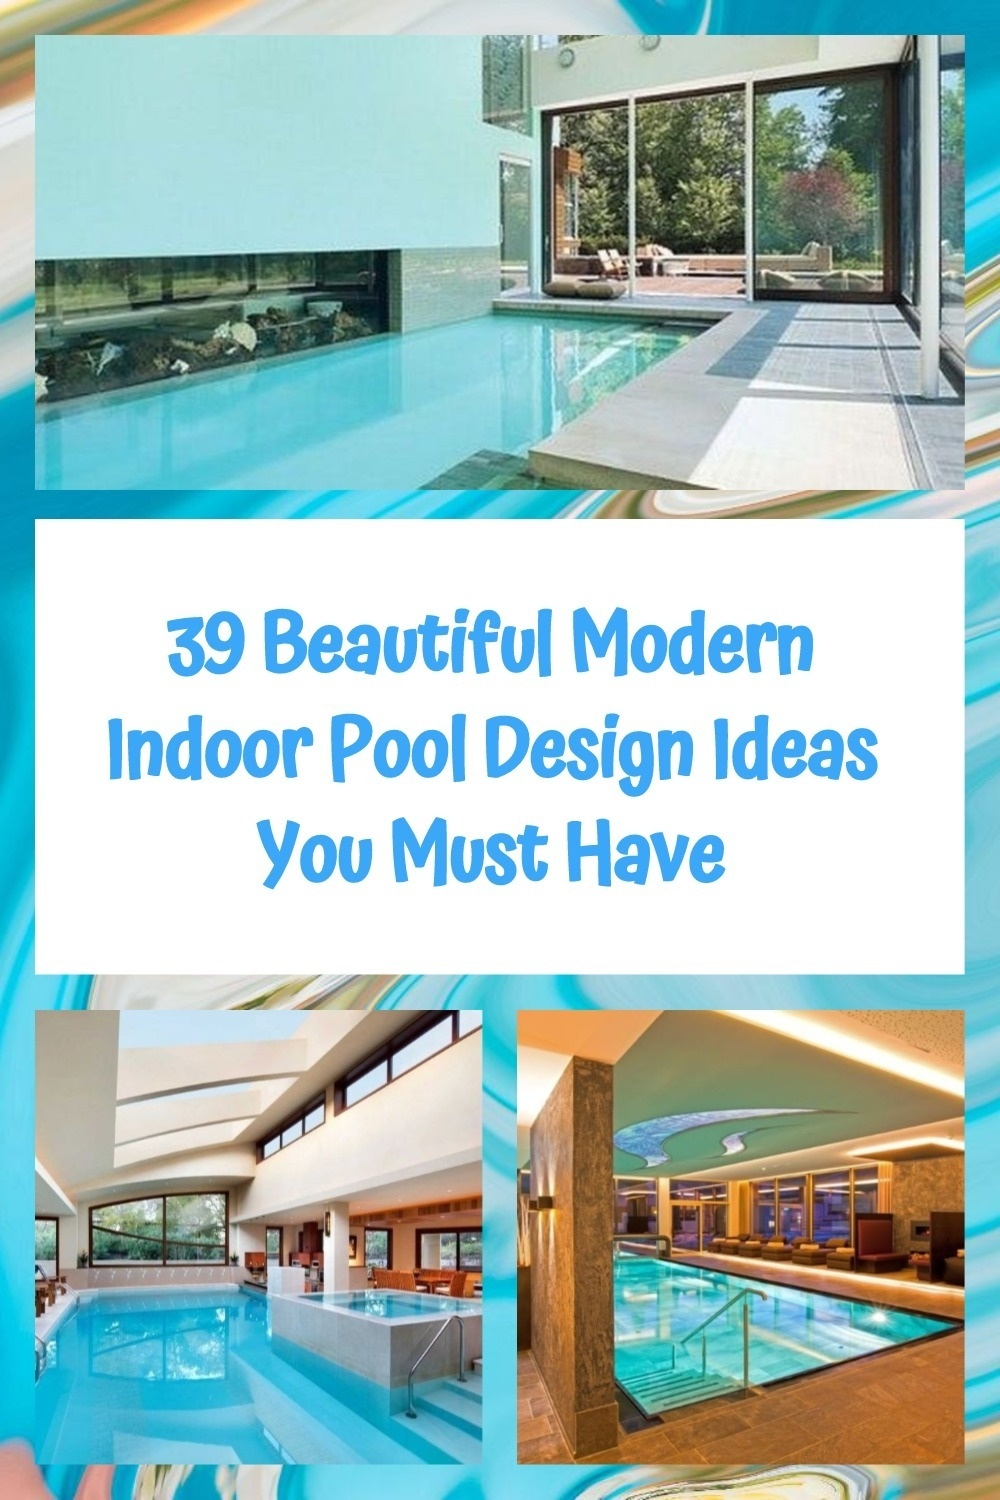 39 Beautiful Modern Indoor Pool Design Ideas You Must Have